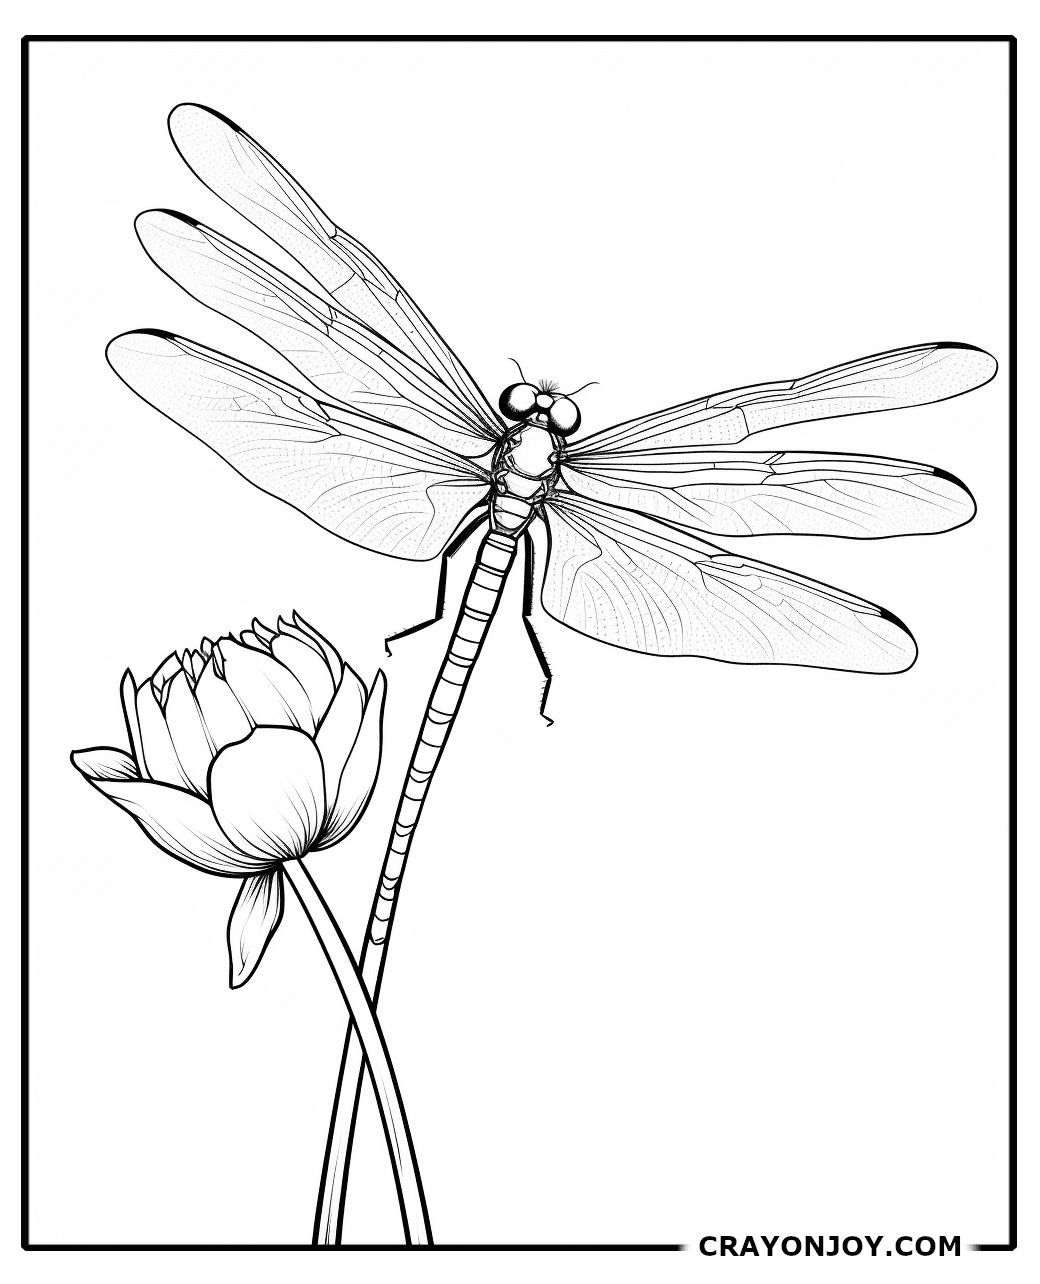 Free Printable Damselfly Coloring Pages for Kids & Adults